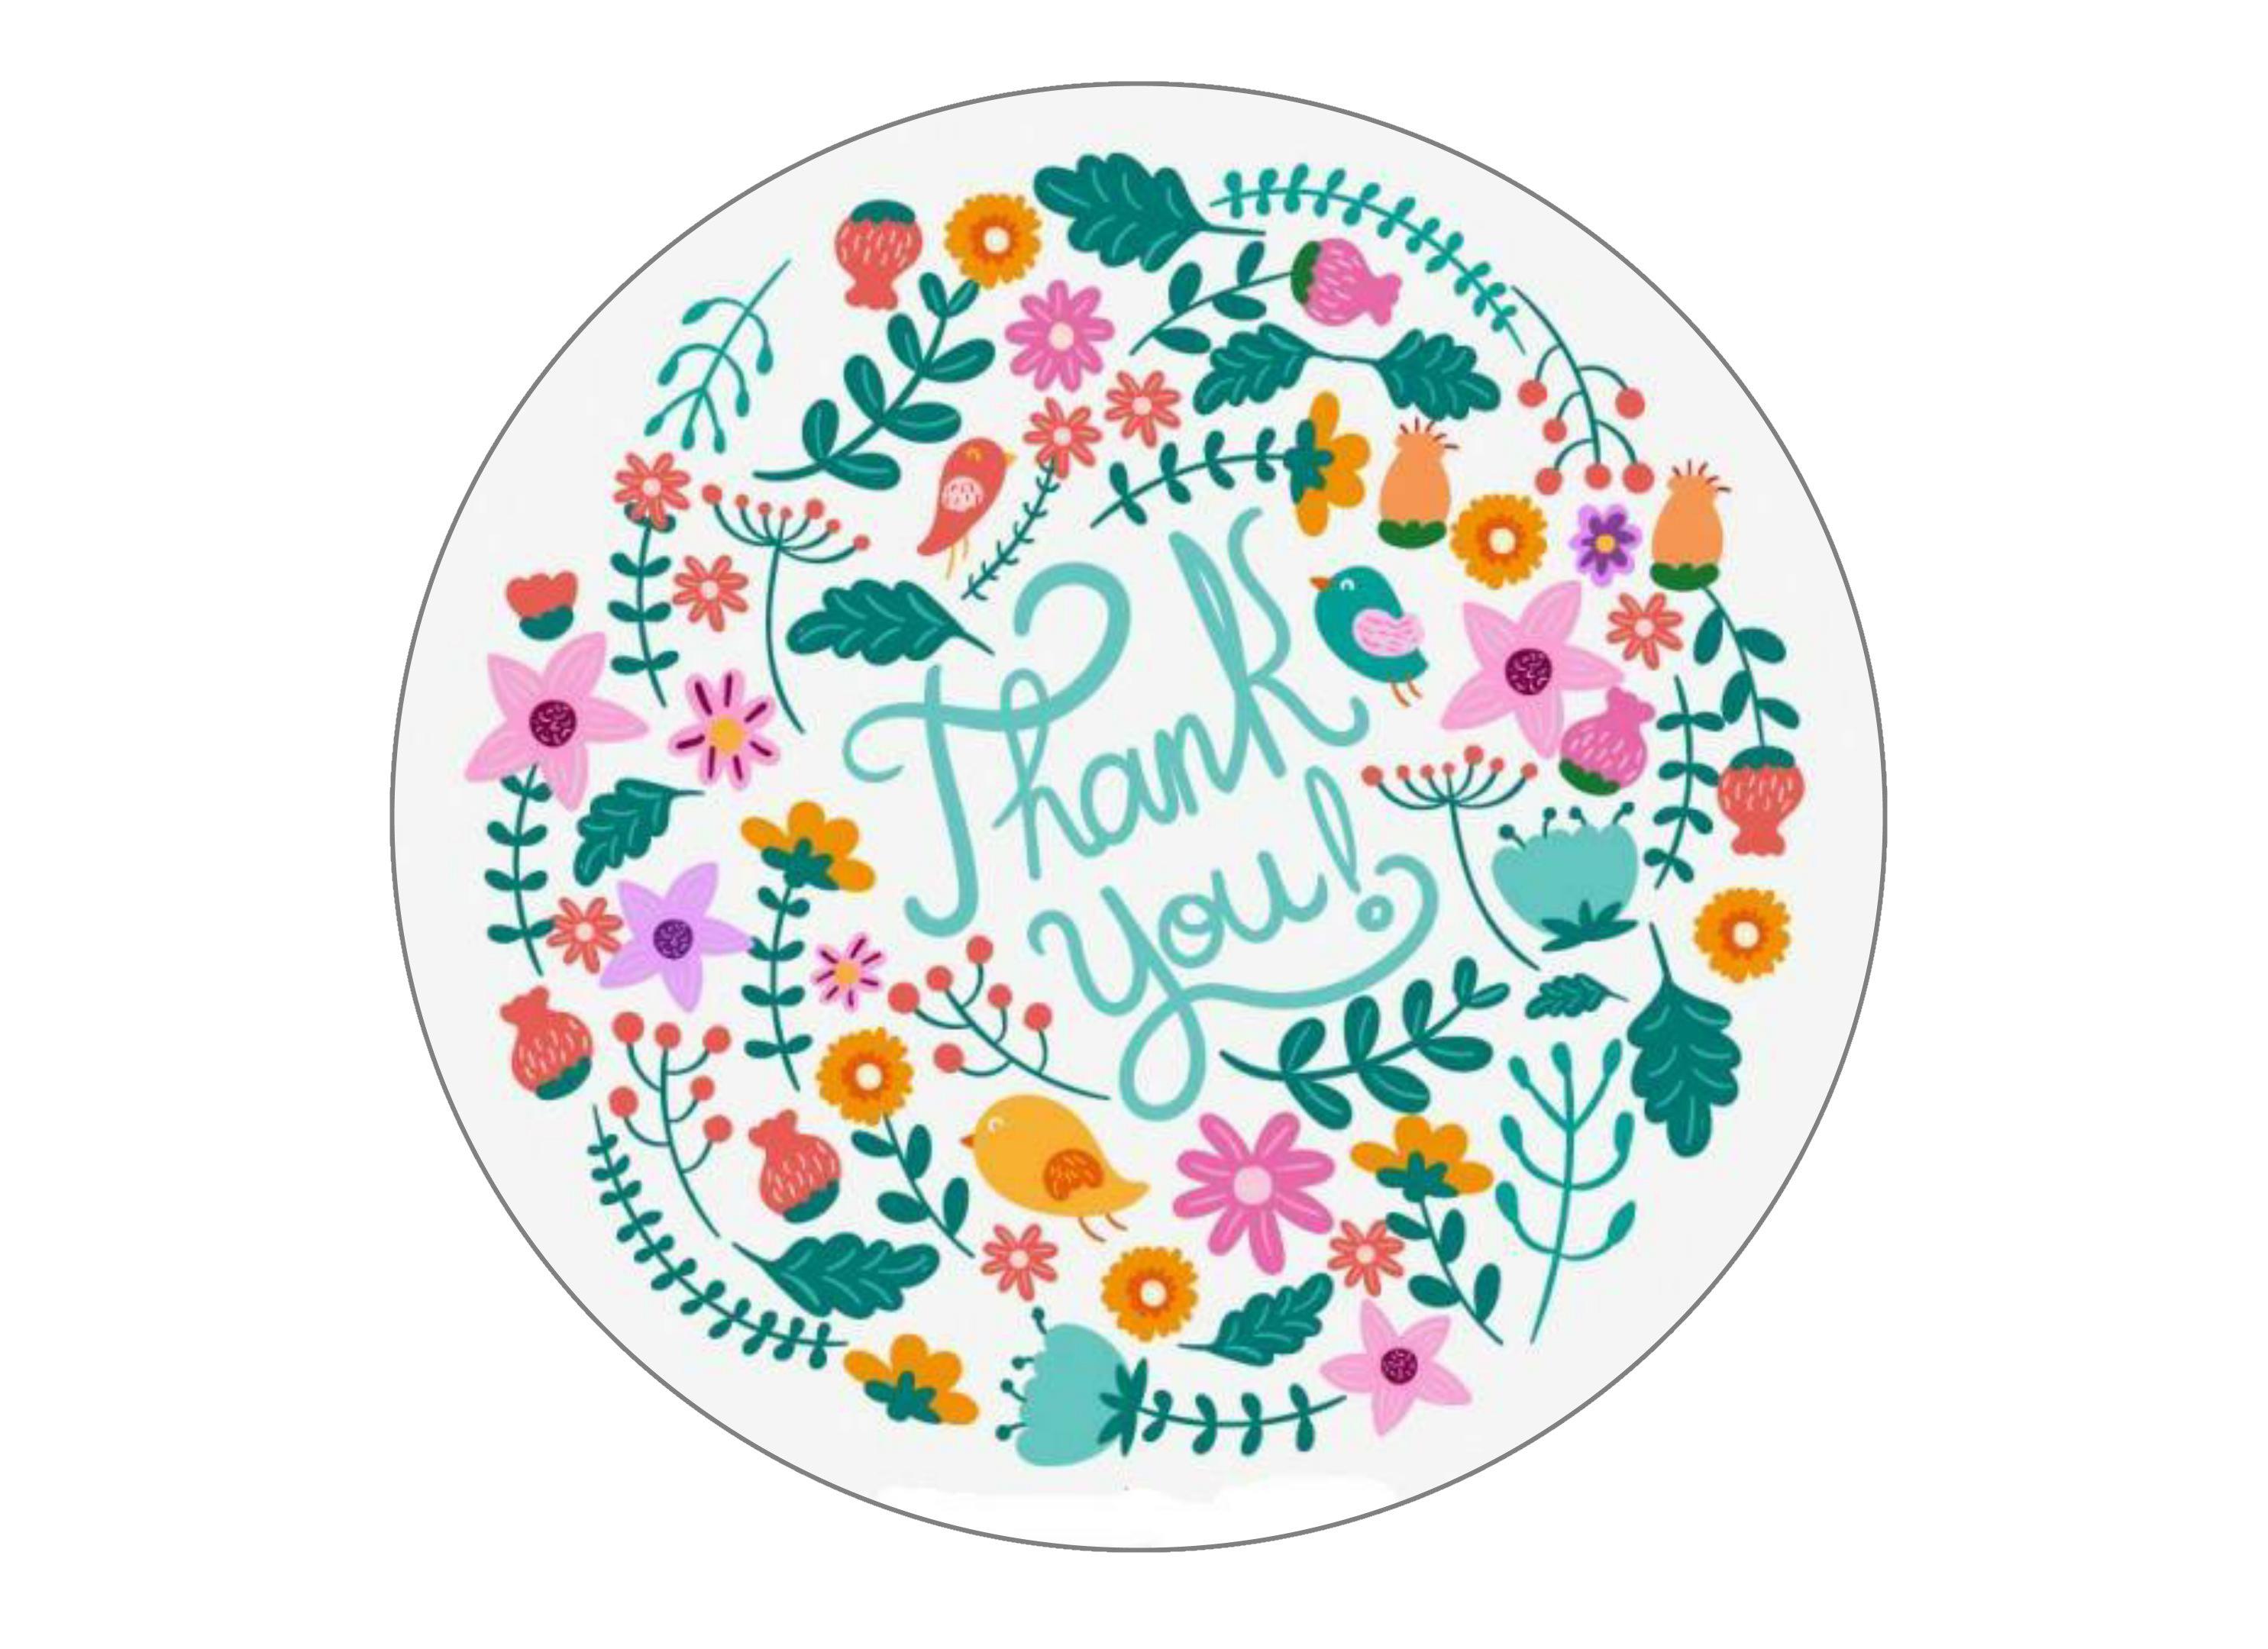 Printed edible 7.5" cake topper - Floral thank you